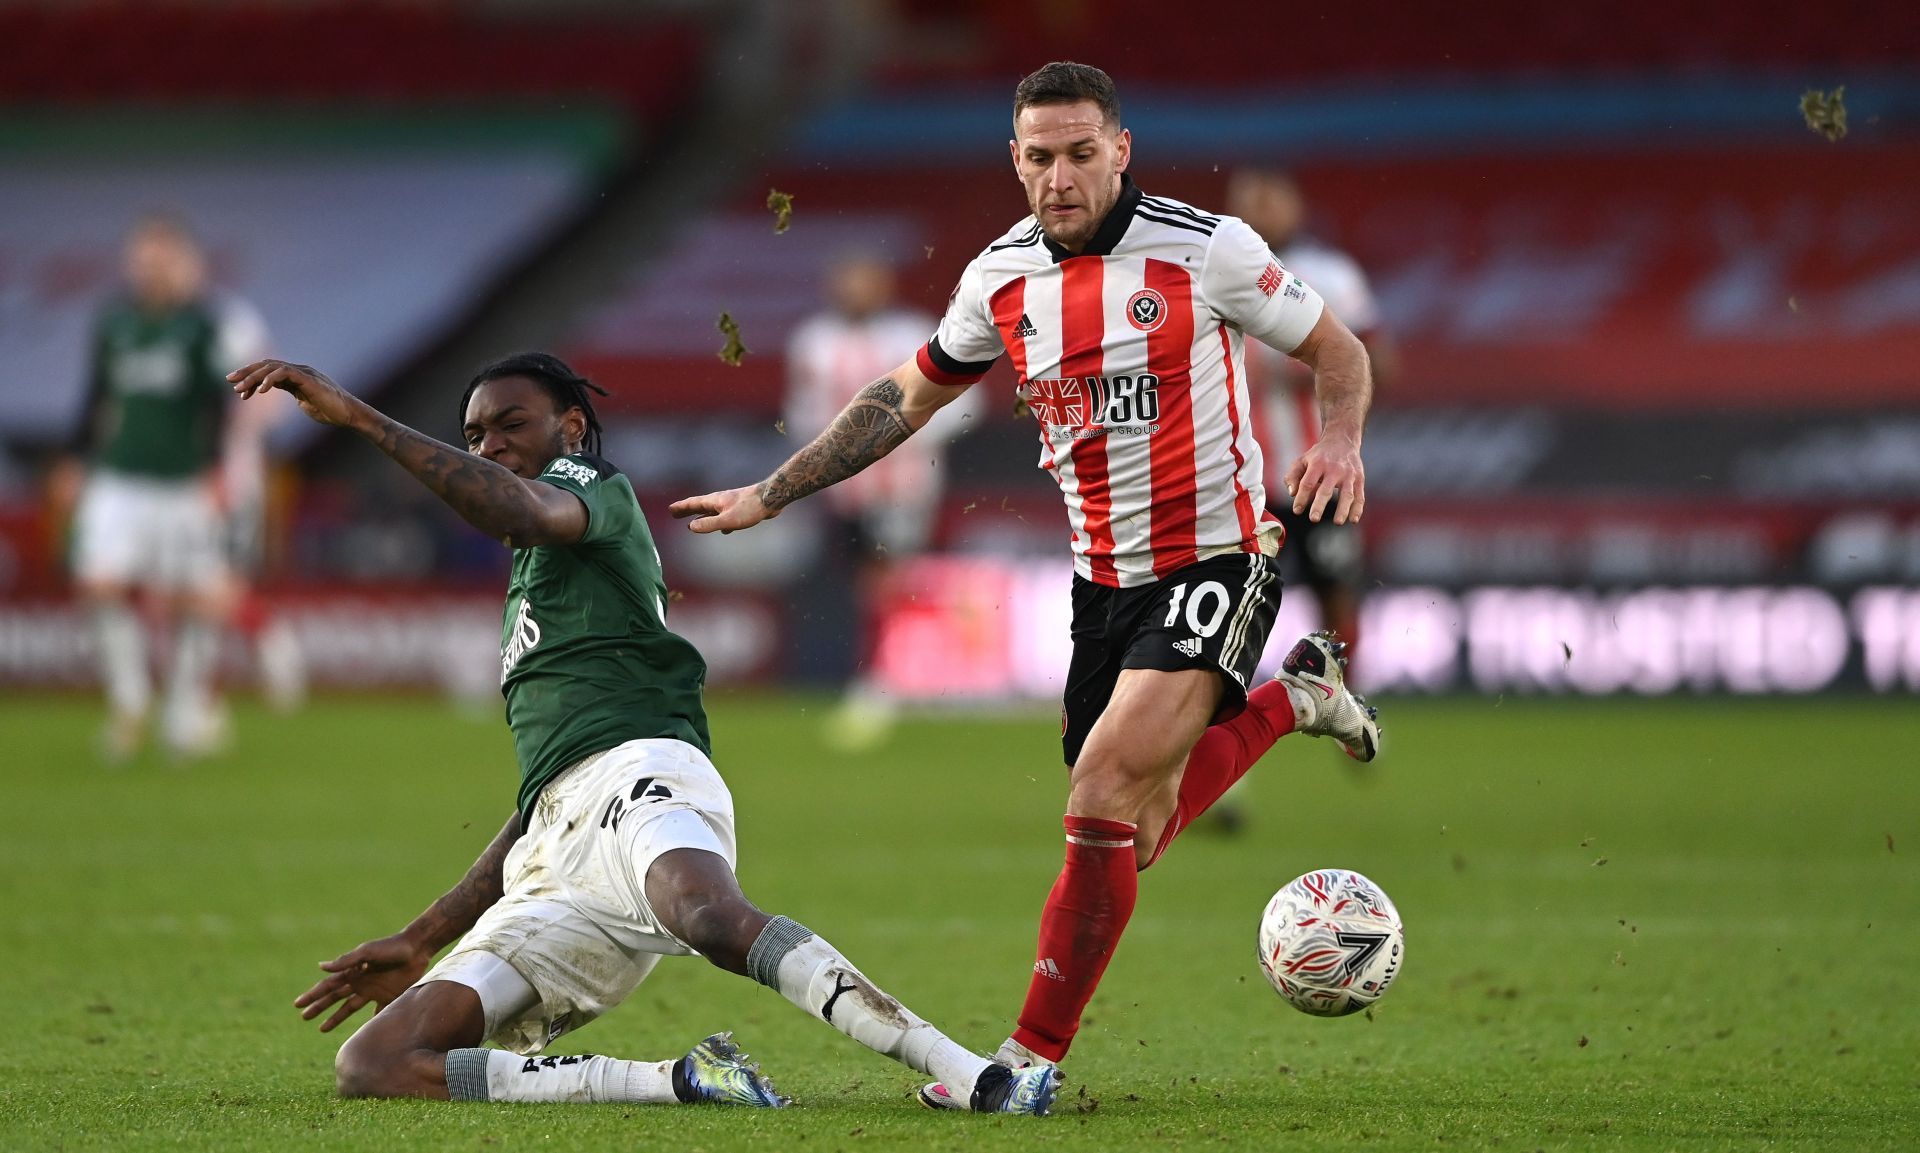 Billy Sharp is key for Sheffield this season